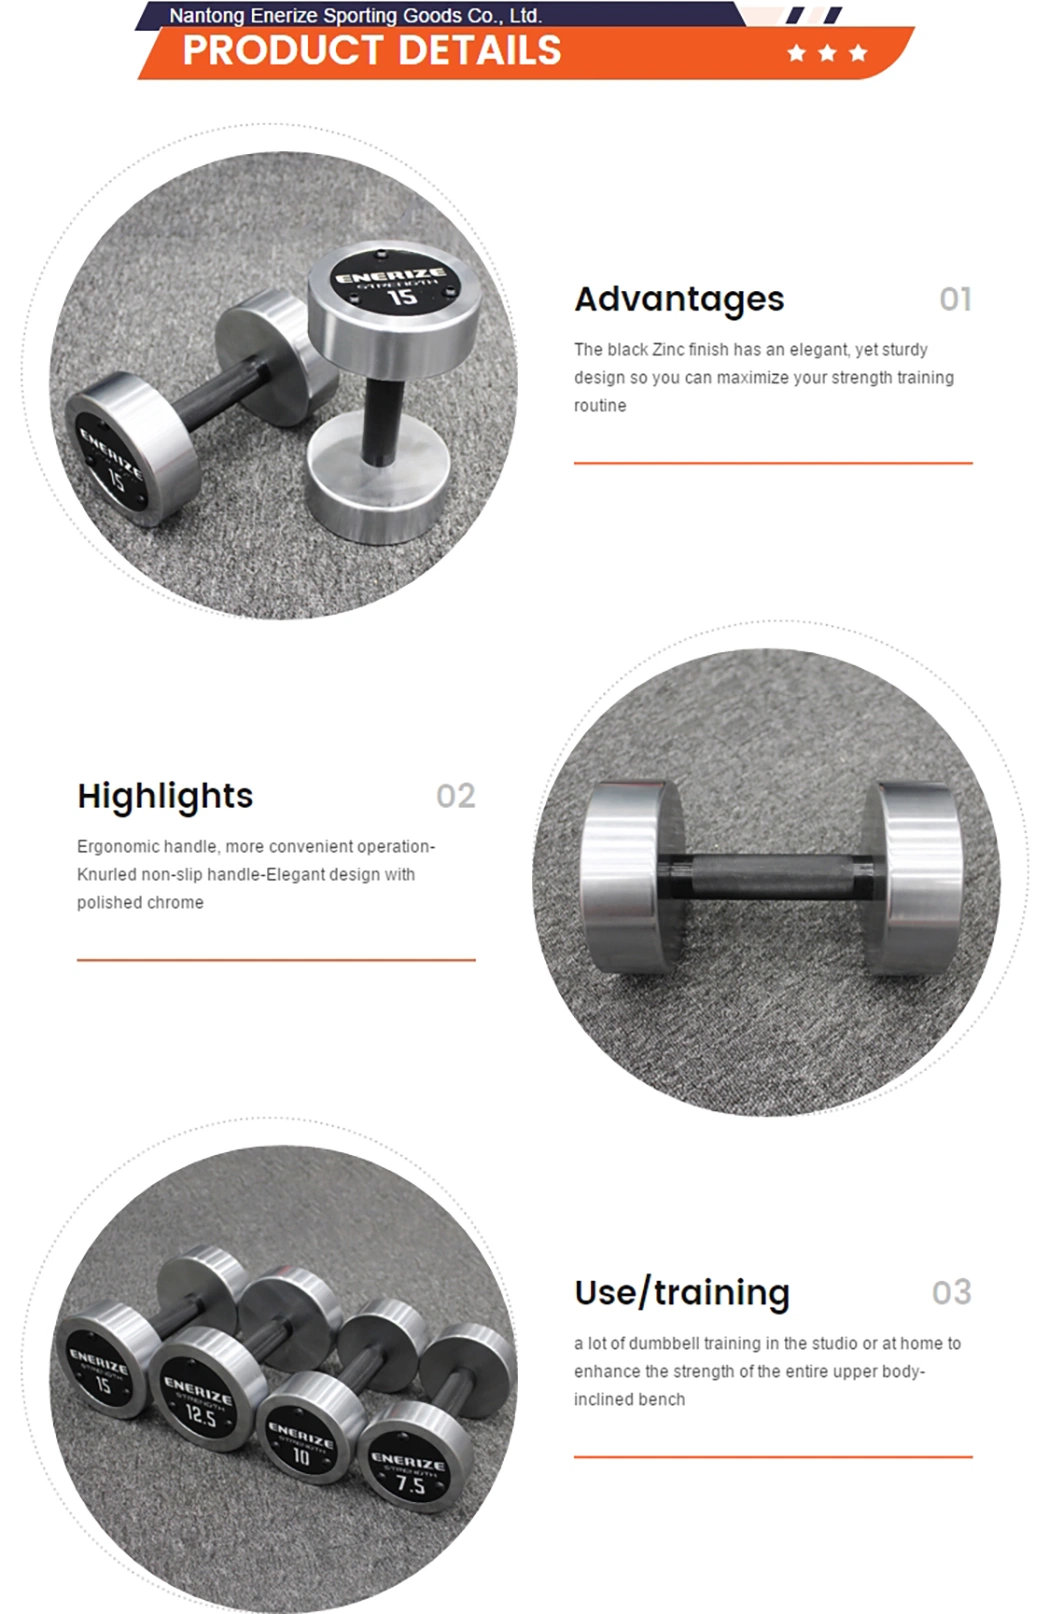 High Quality Stainless Steel Dumbbell Set Chrome Dumbbells 2.5kg-40kg Rotate Dumbbell Free Weights